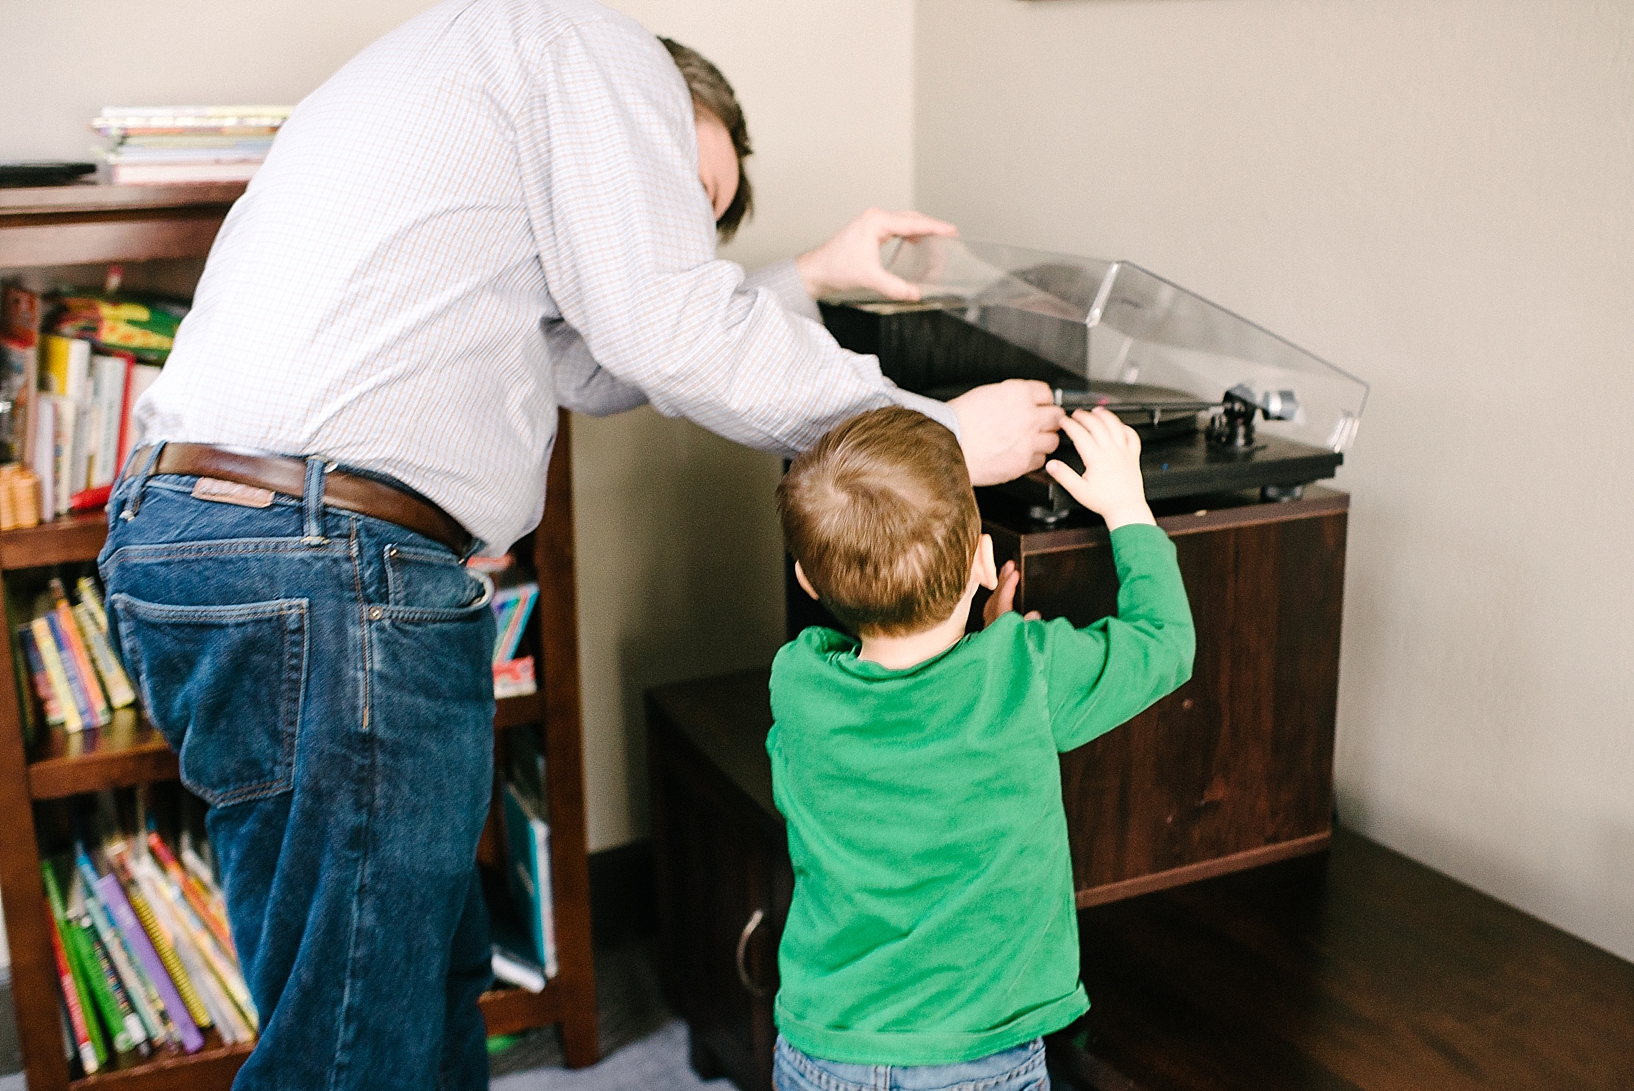 man and son putting needle on record player